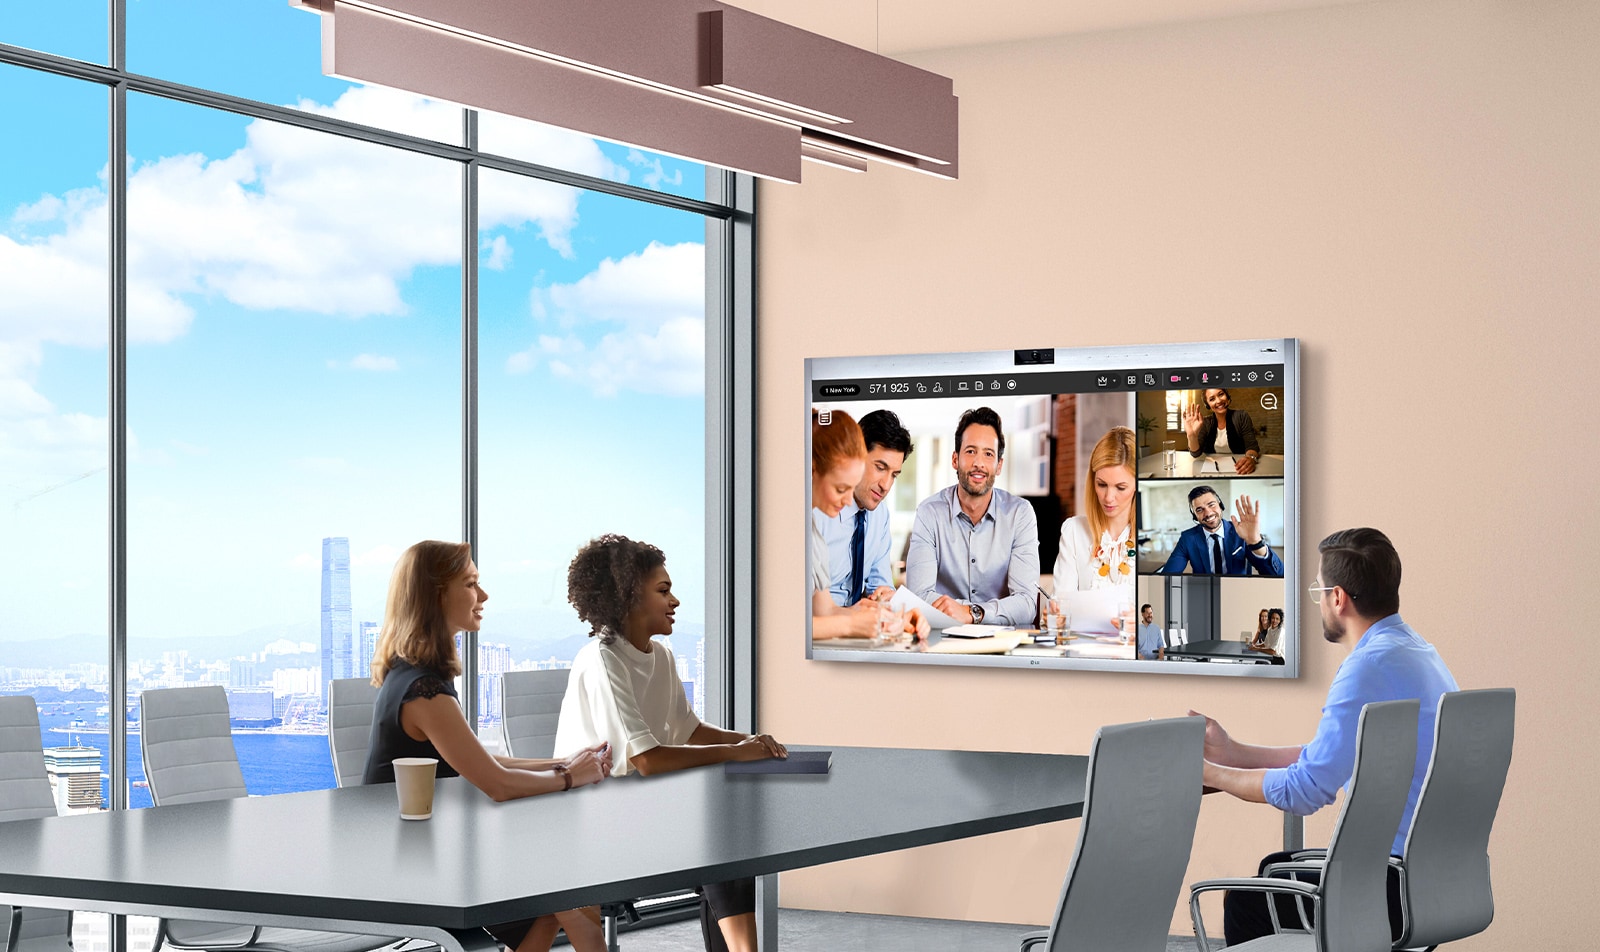 55CT5WJ-02-All-in-One-Video-Conferencing-Display-for-Maximum-Productivity-One-Quick-Digital-Signage-ID-D